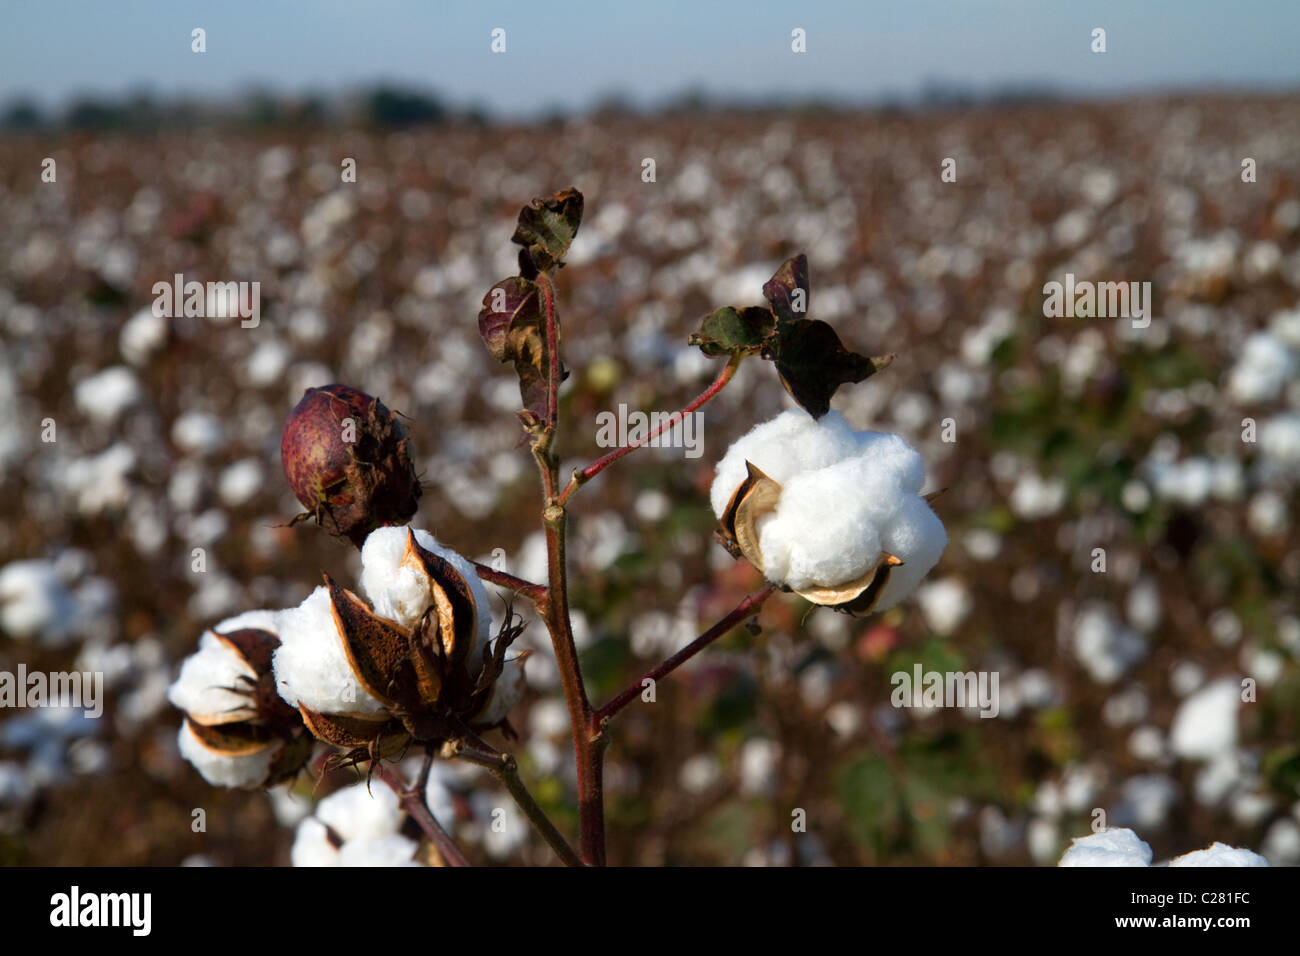 Cotton field ready for harvest in the American South. Stock Photo